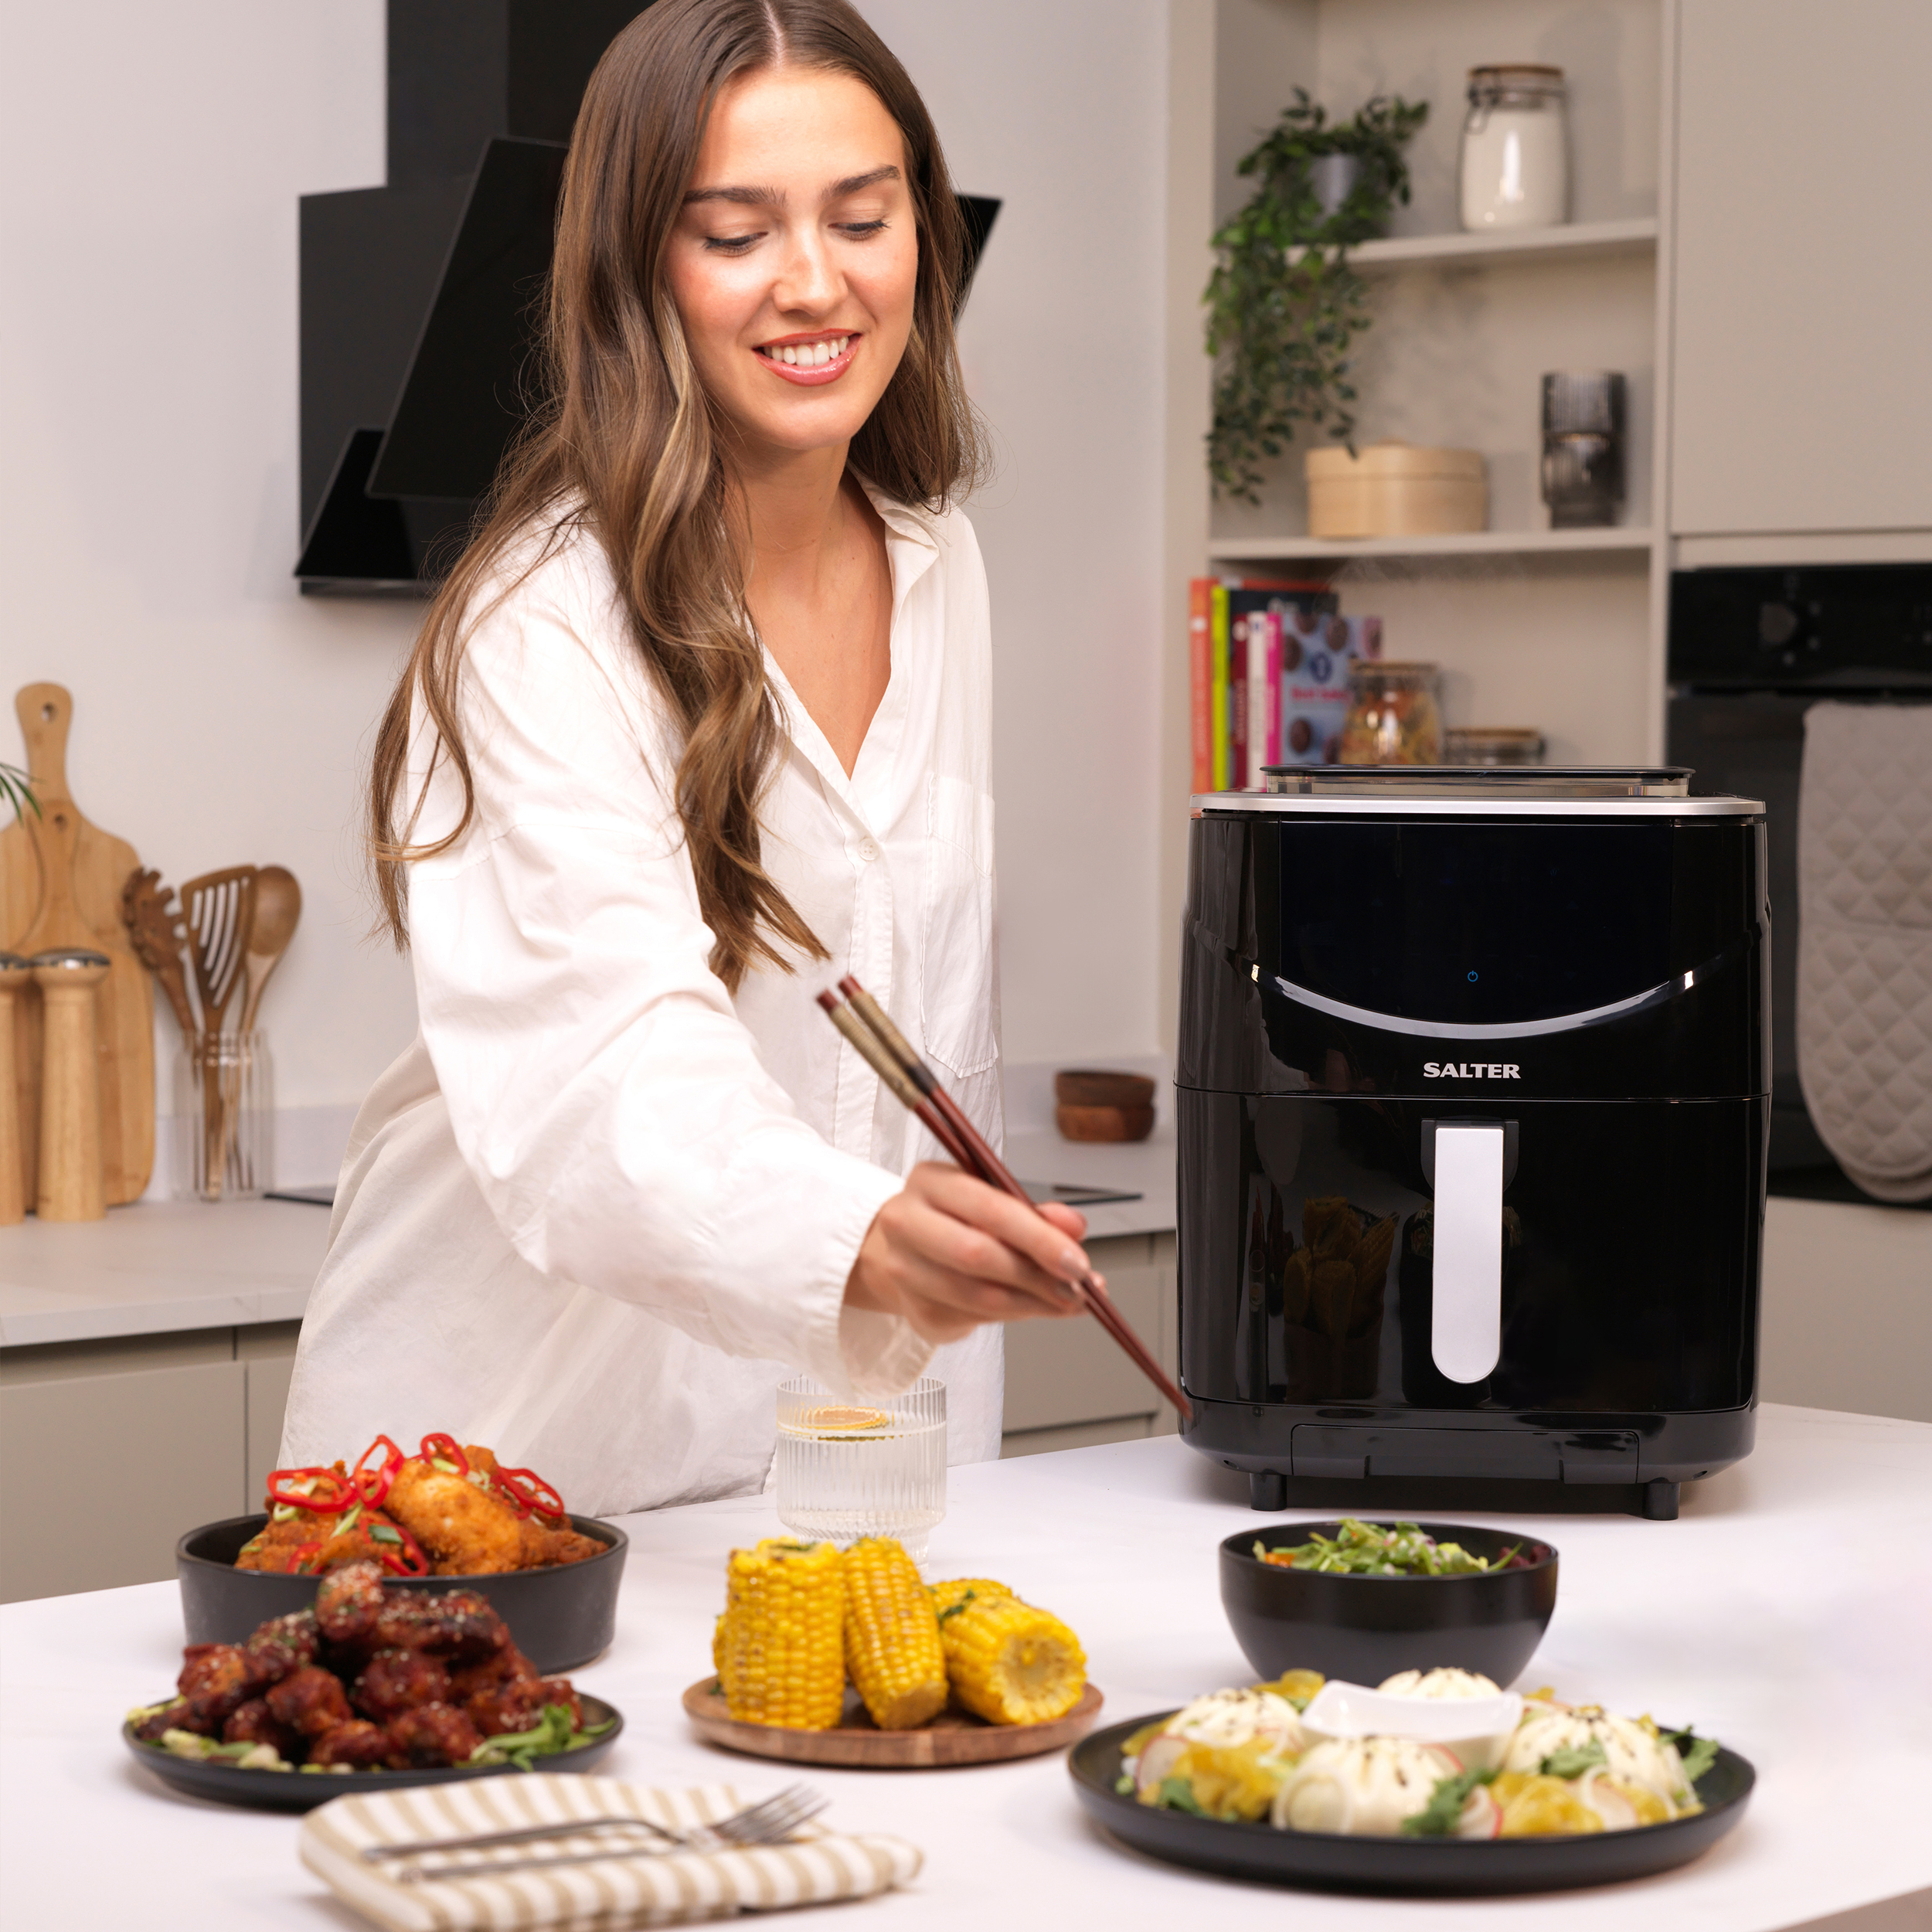 A woman reaching to eat food with Chopsticks in front of a Salter Fuzion Air Fryer